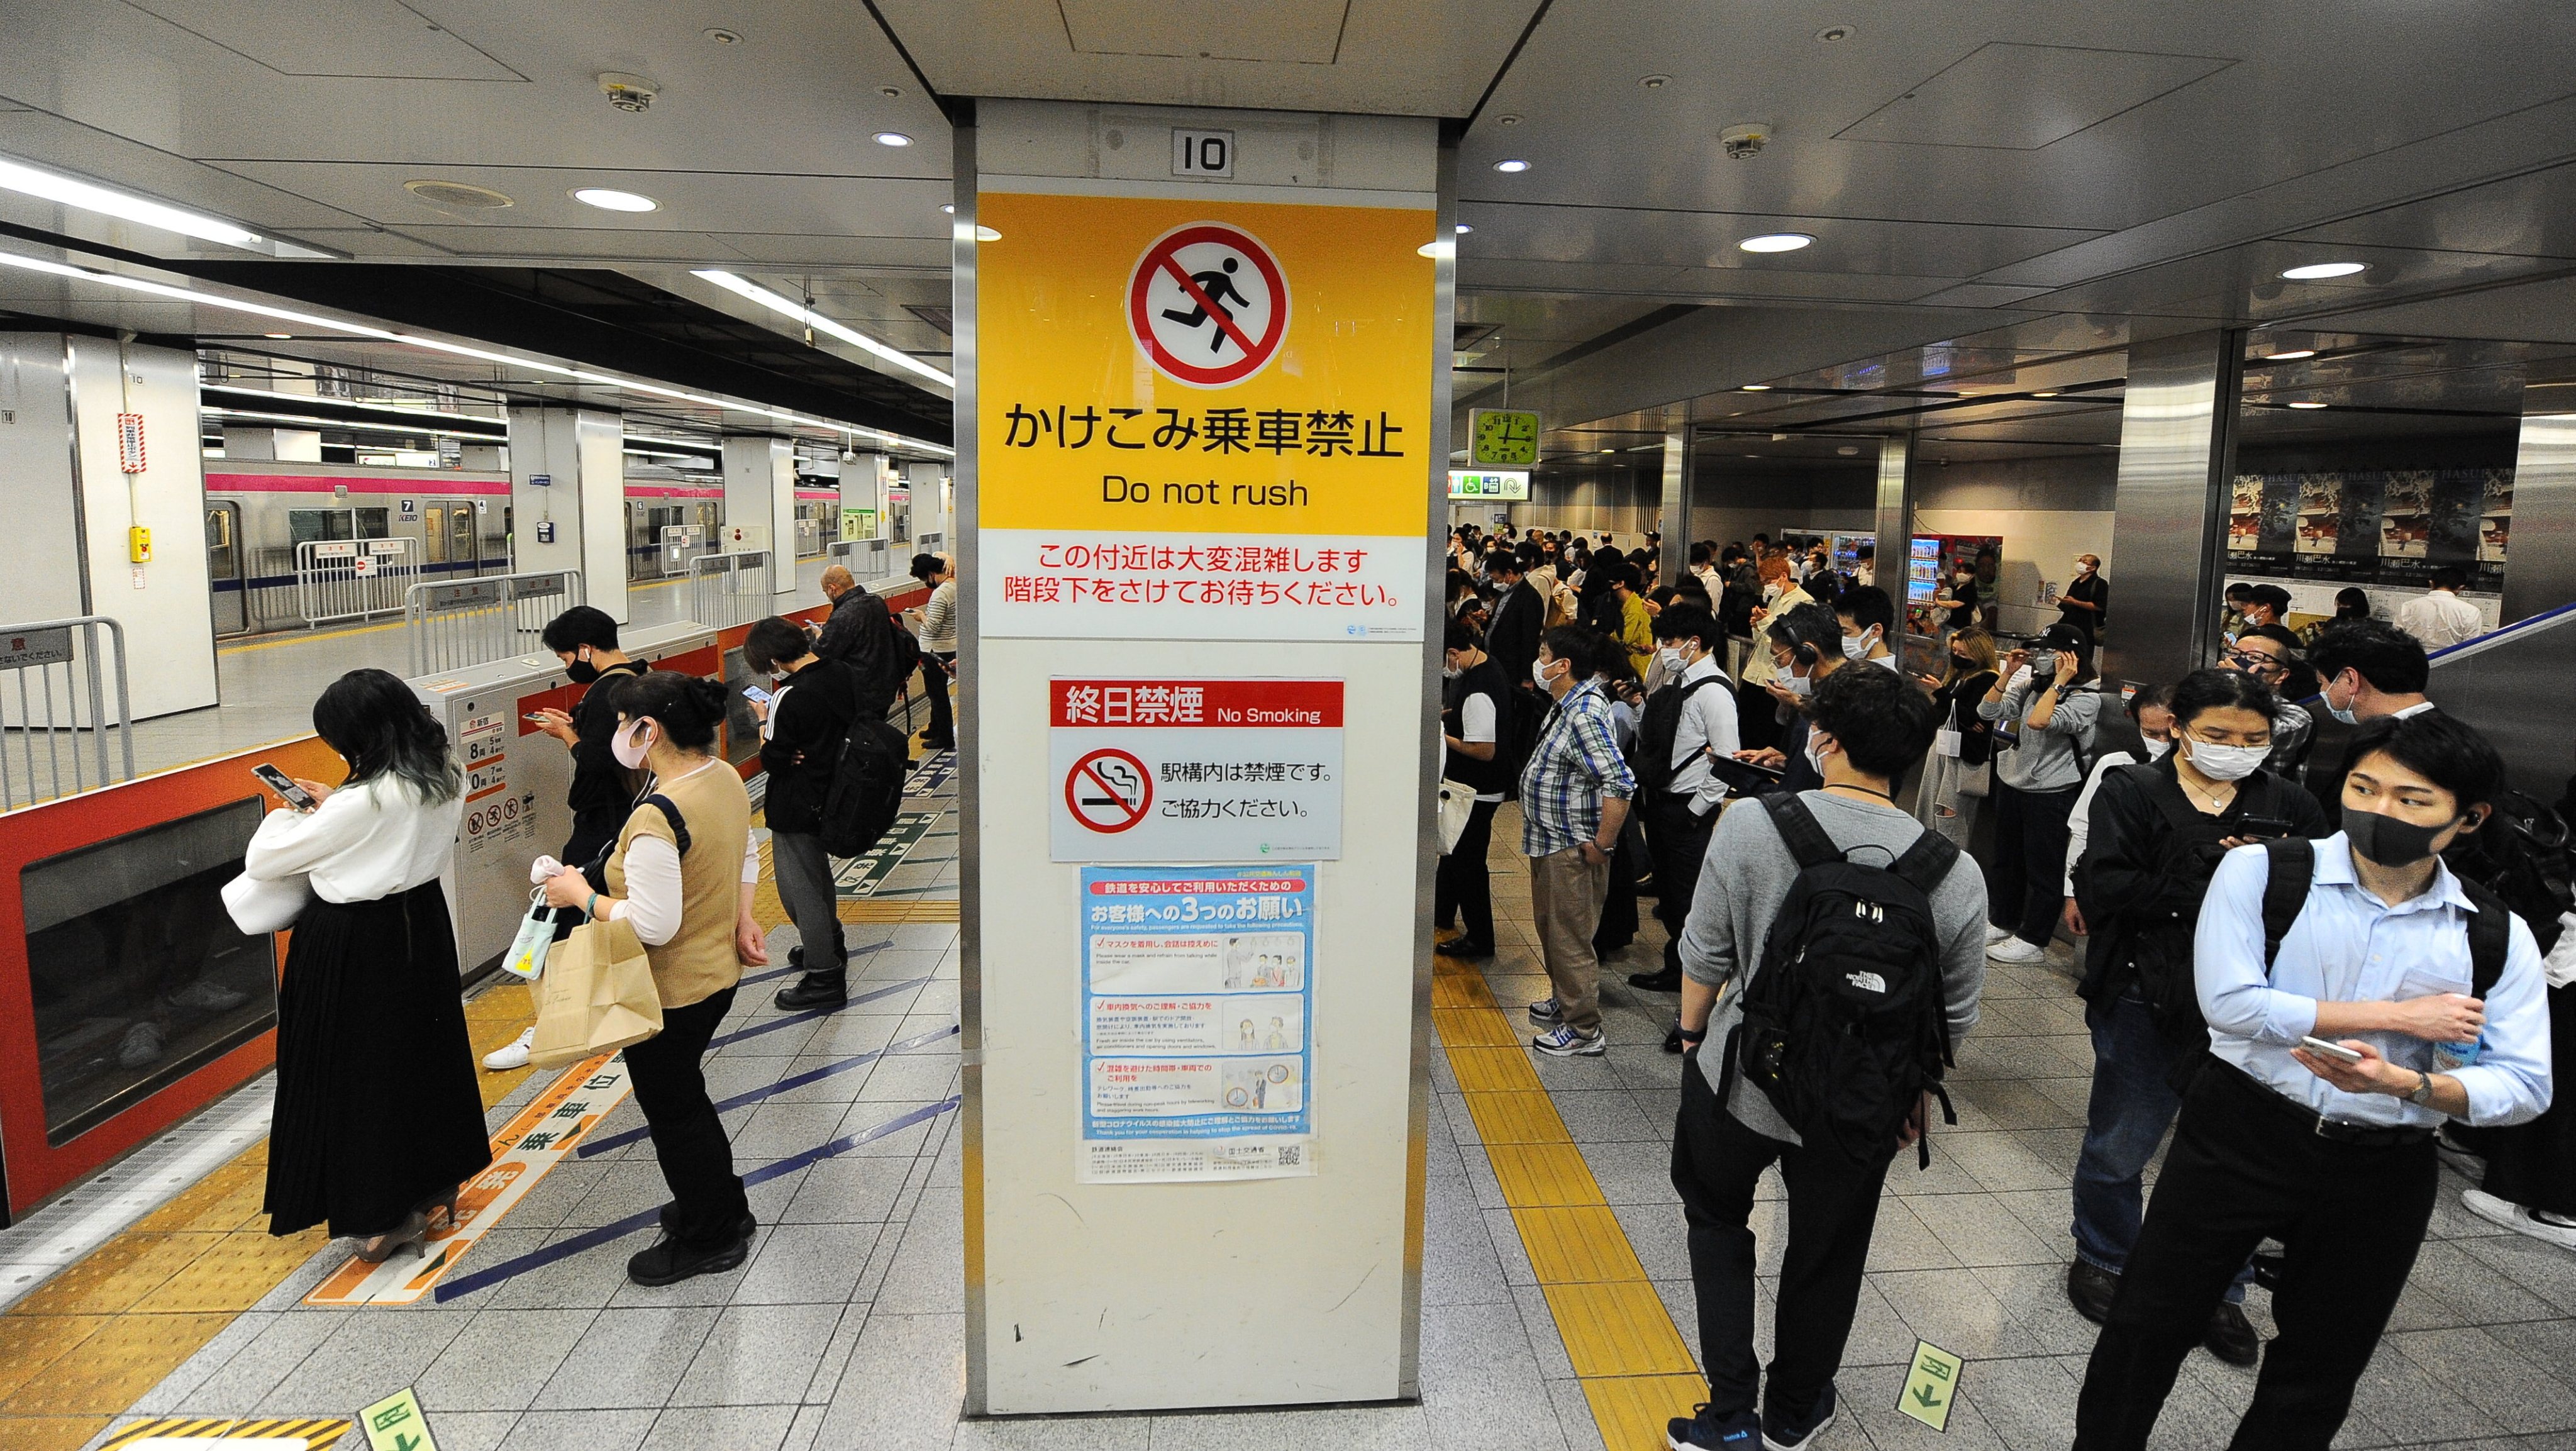 Rail services disrupted in Tokyo due to earthquake